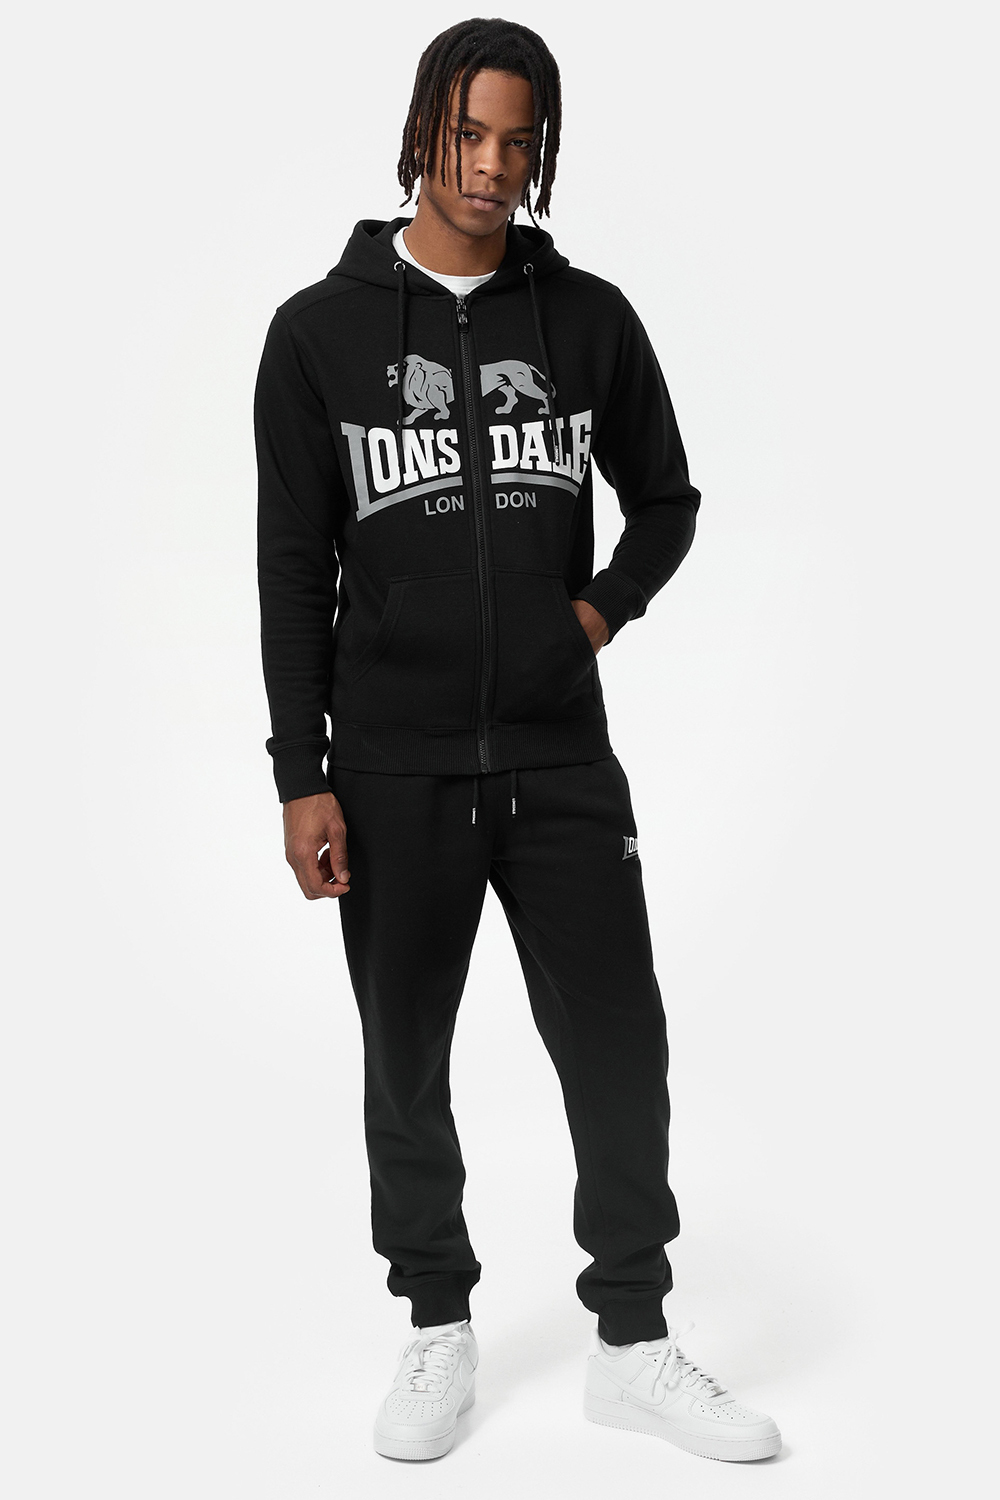 Ropa Deportiva Hombre Lonsdale